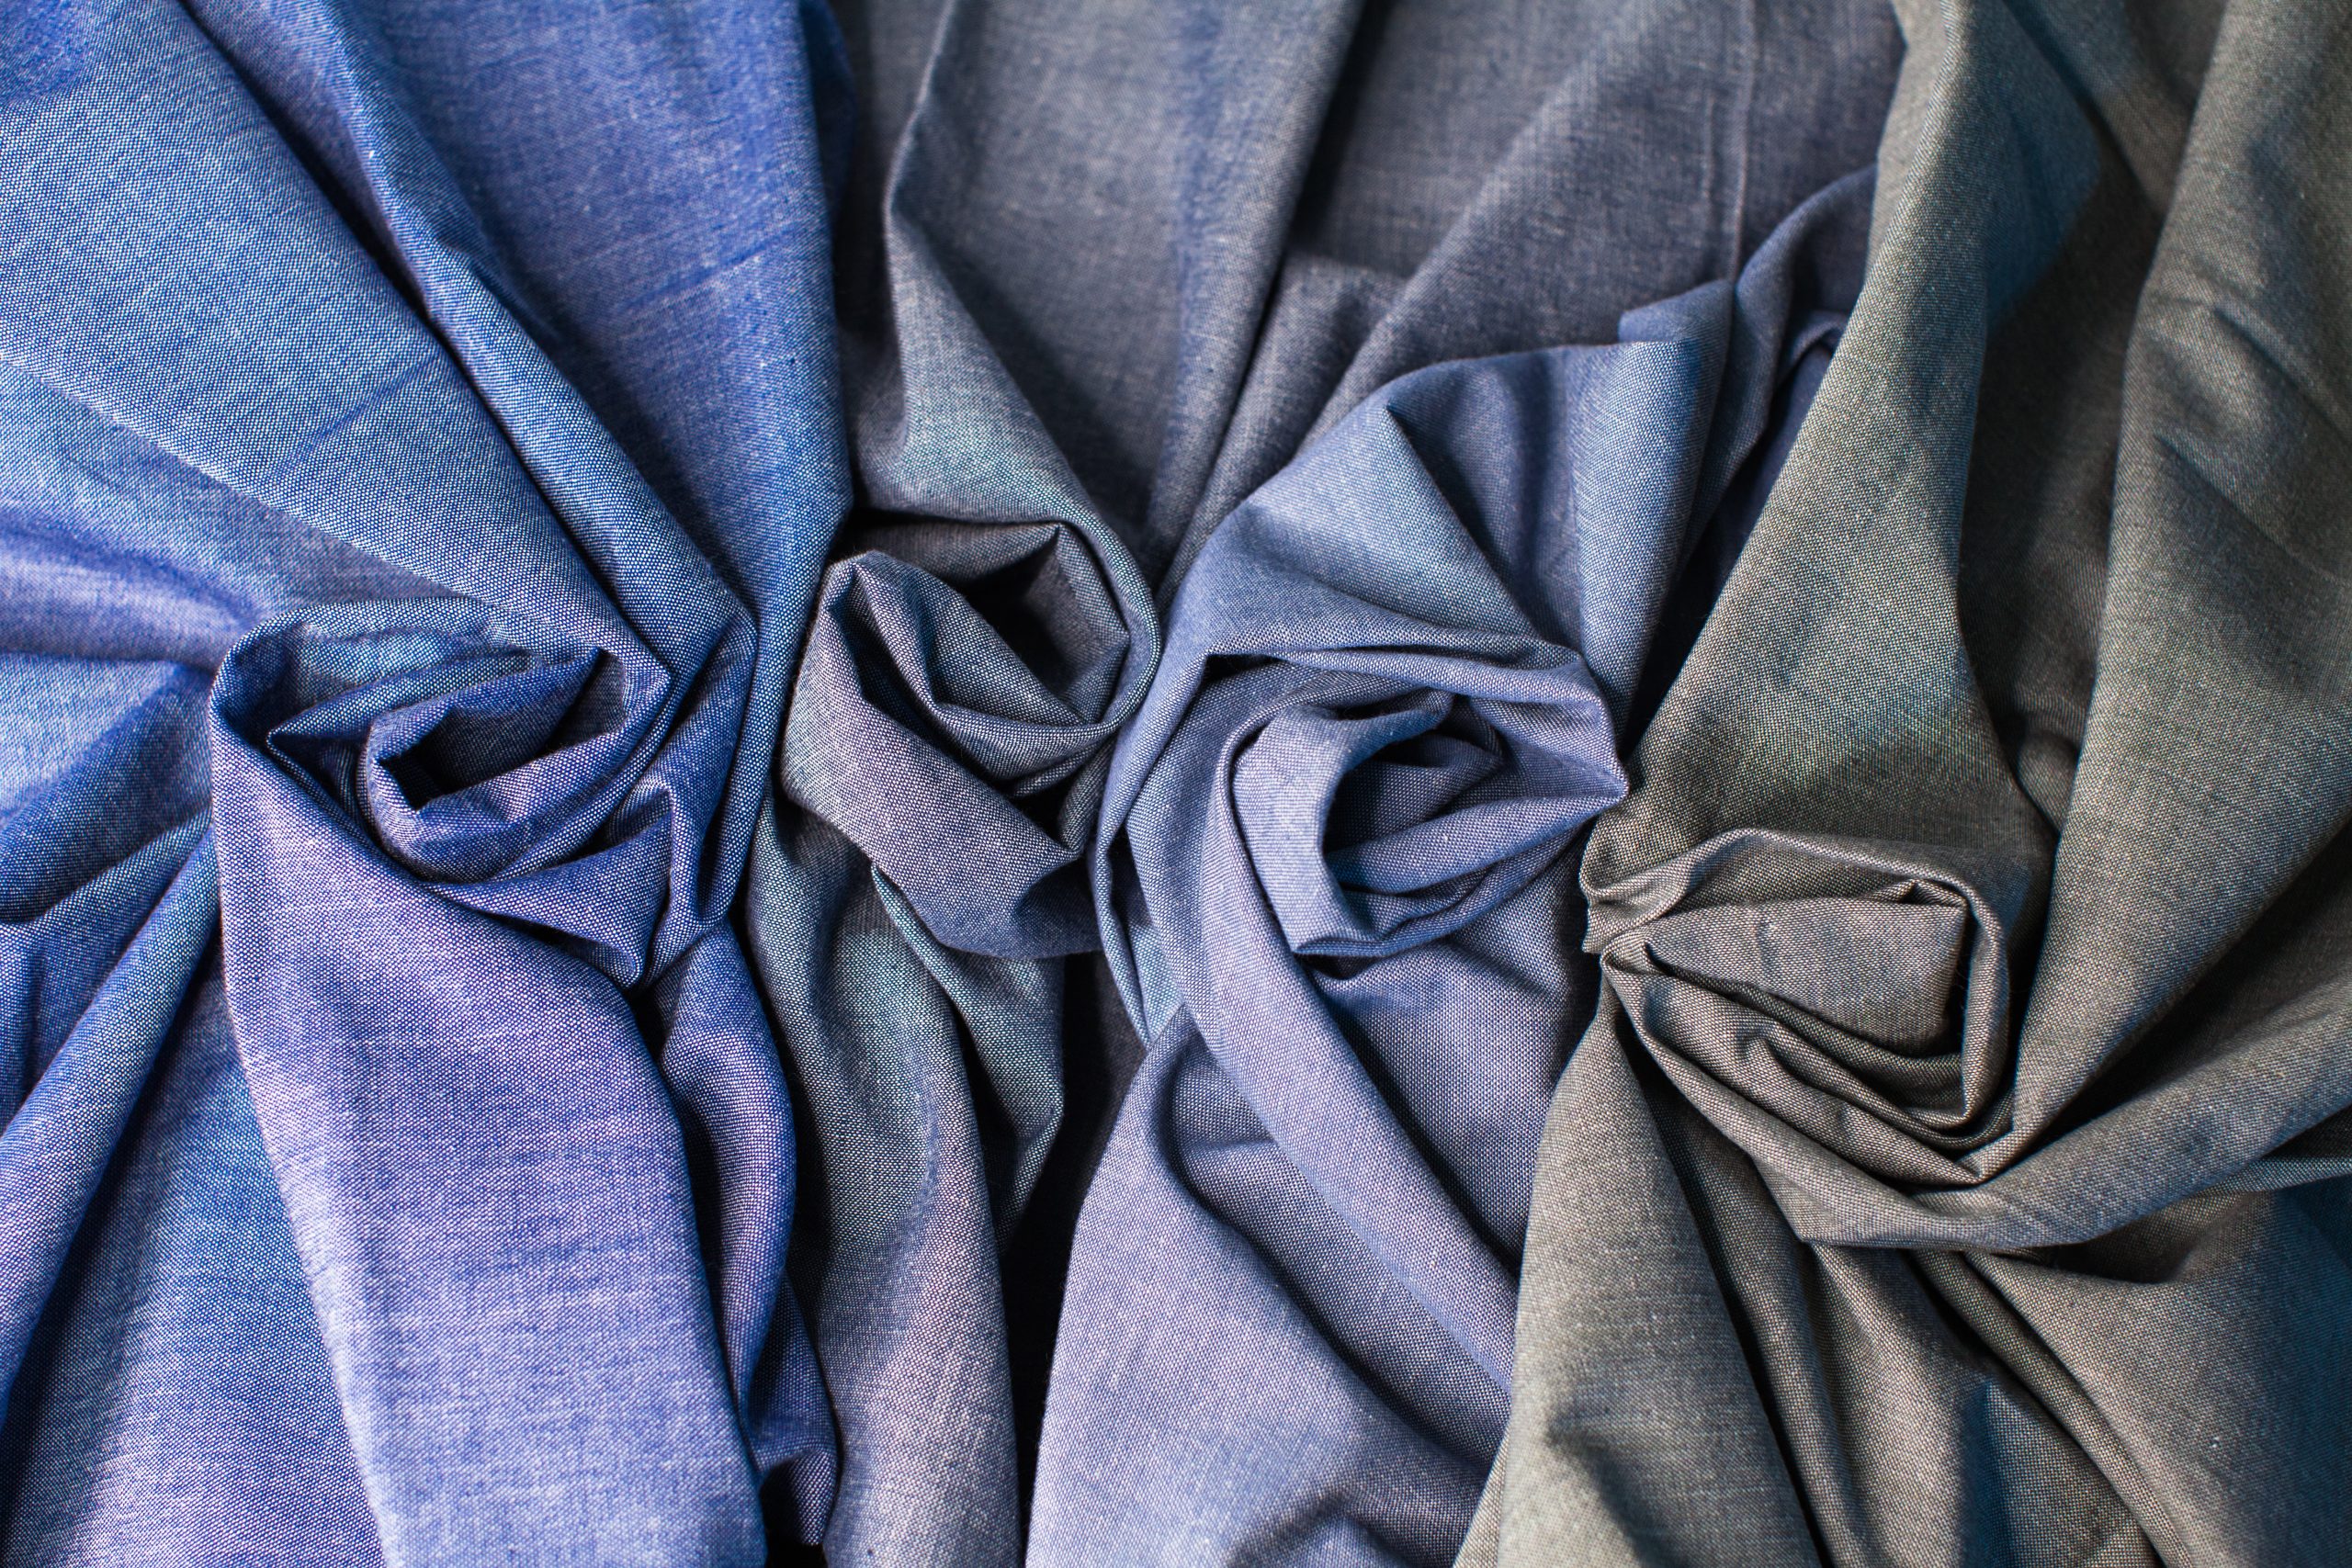 photograph from above three blue and one light black selvedge woven textiles next to each other